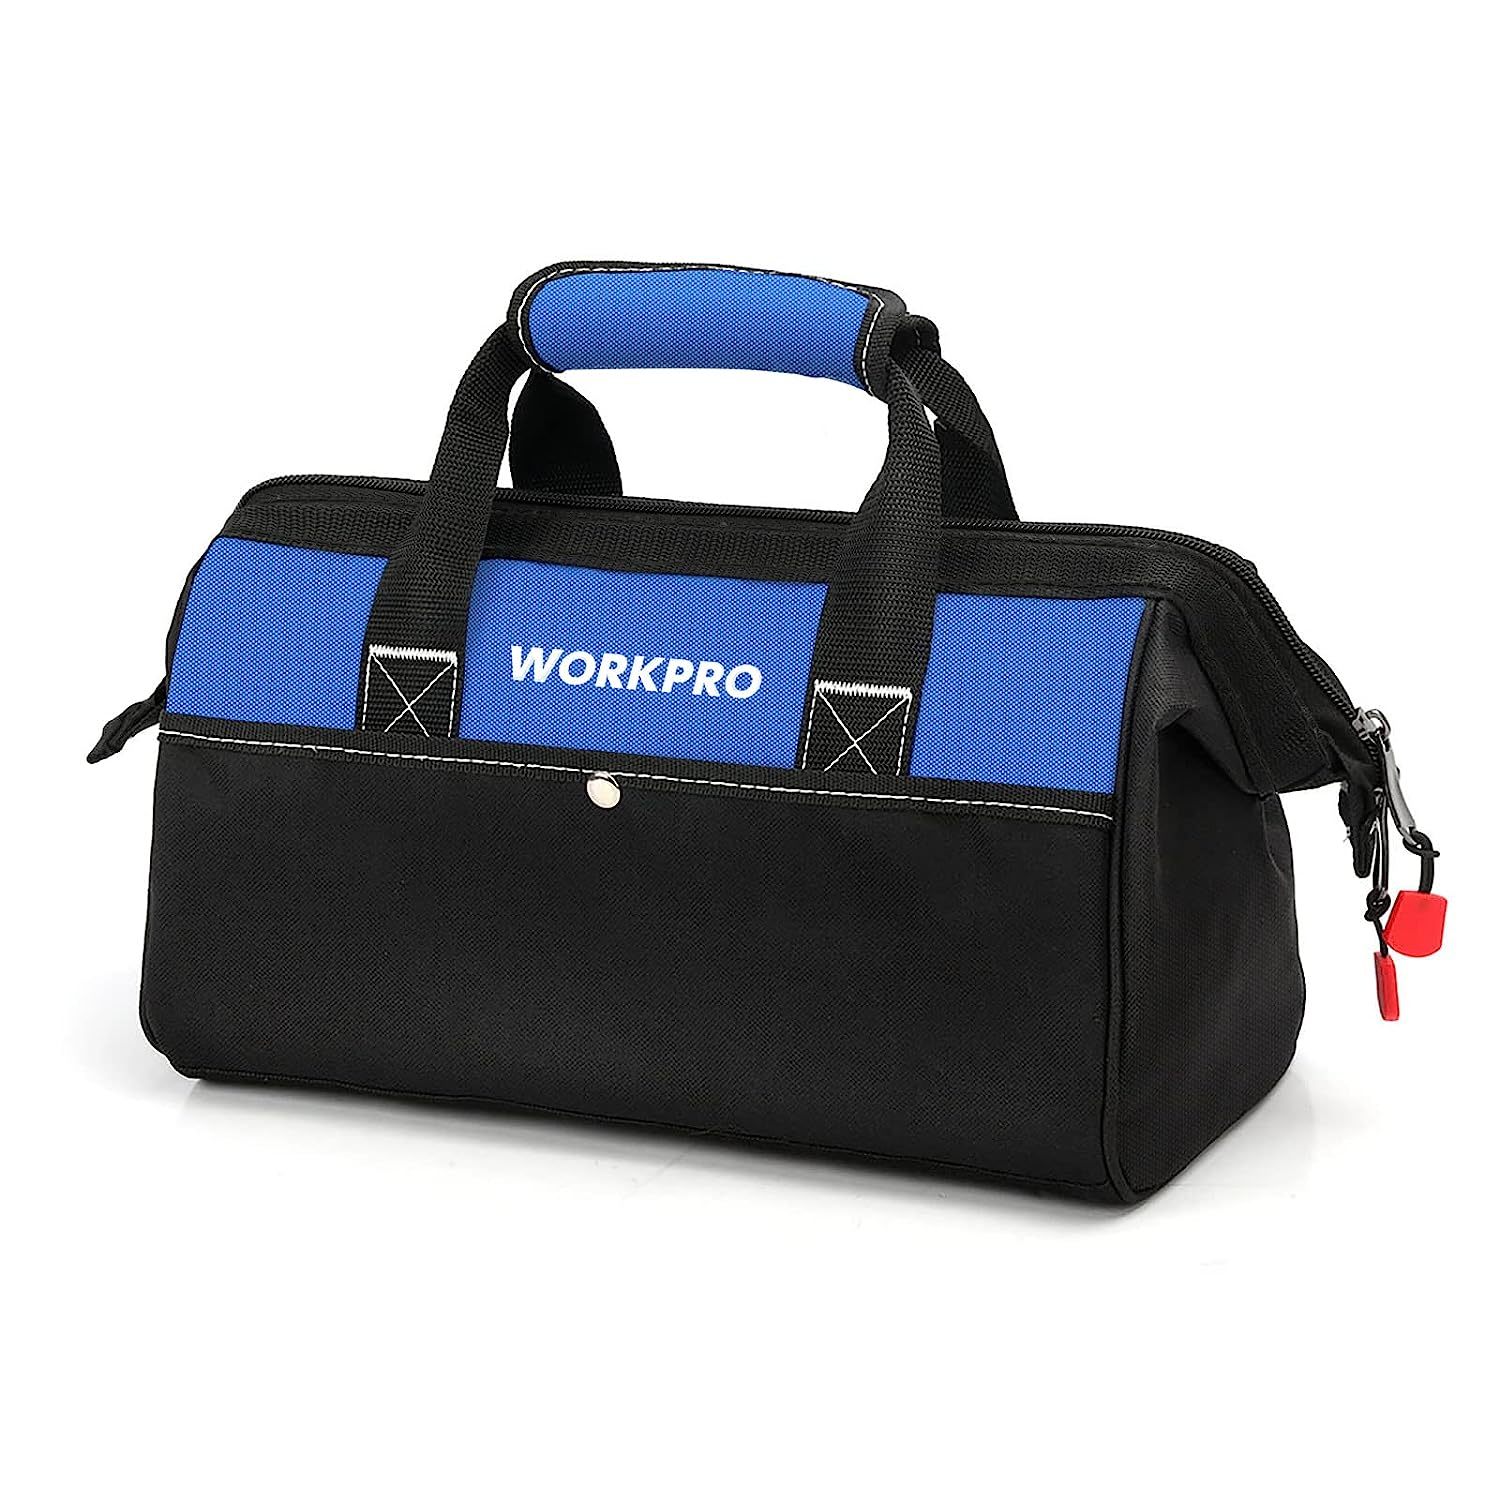 WORKPRO 13-inch Tool Bag, Wide Mouth Tool Tote Bag with Inside Pockets for Tool  - $38.99